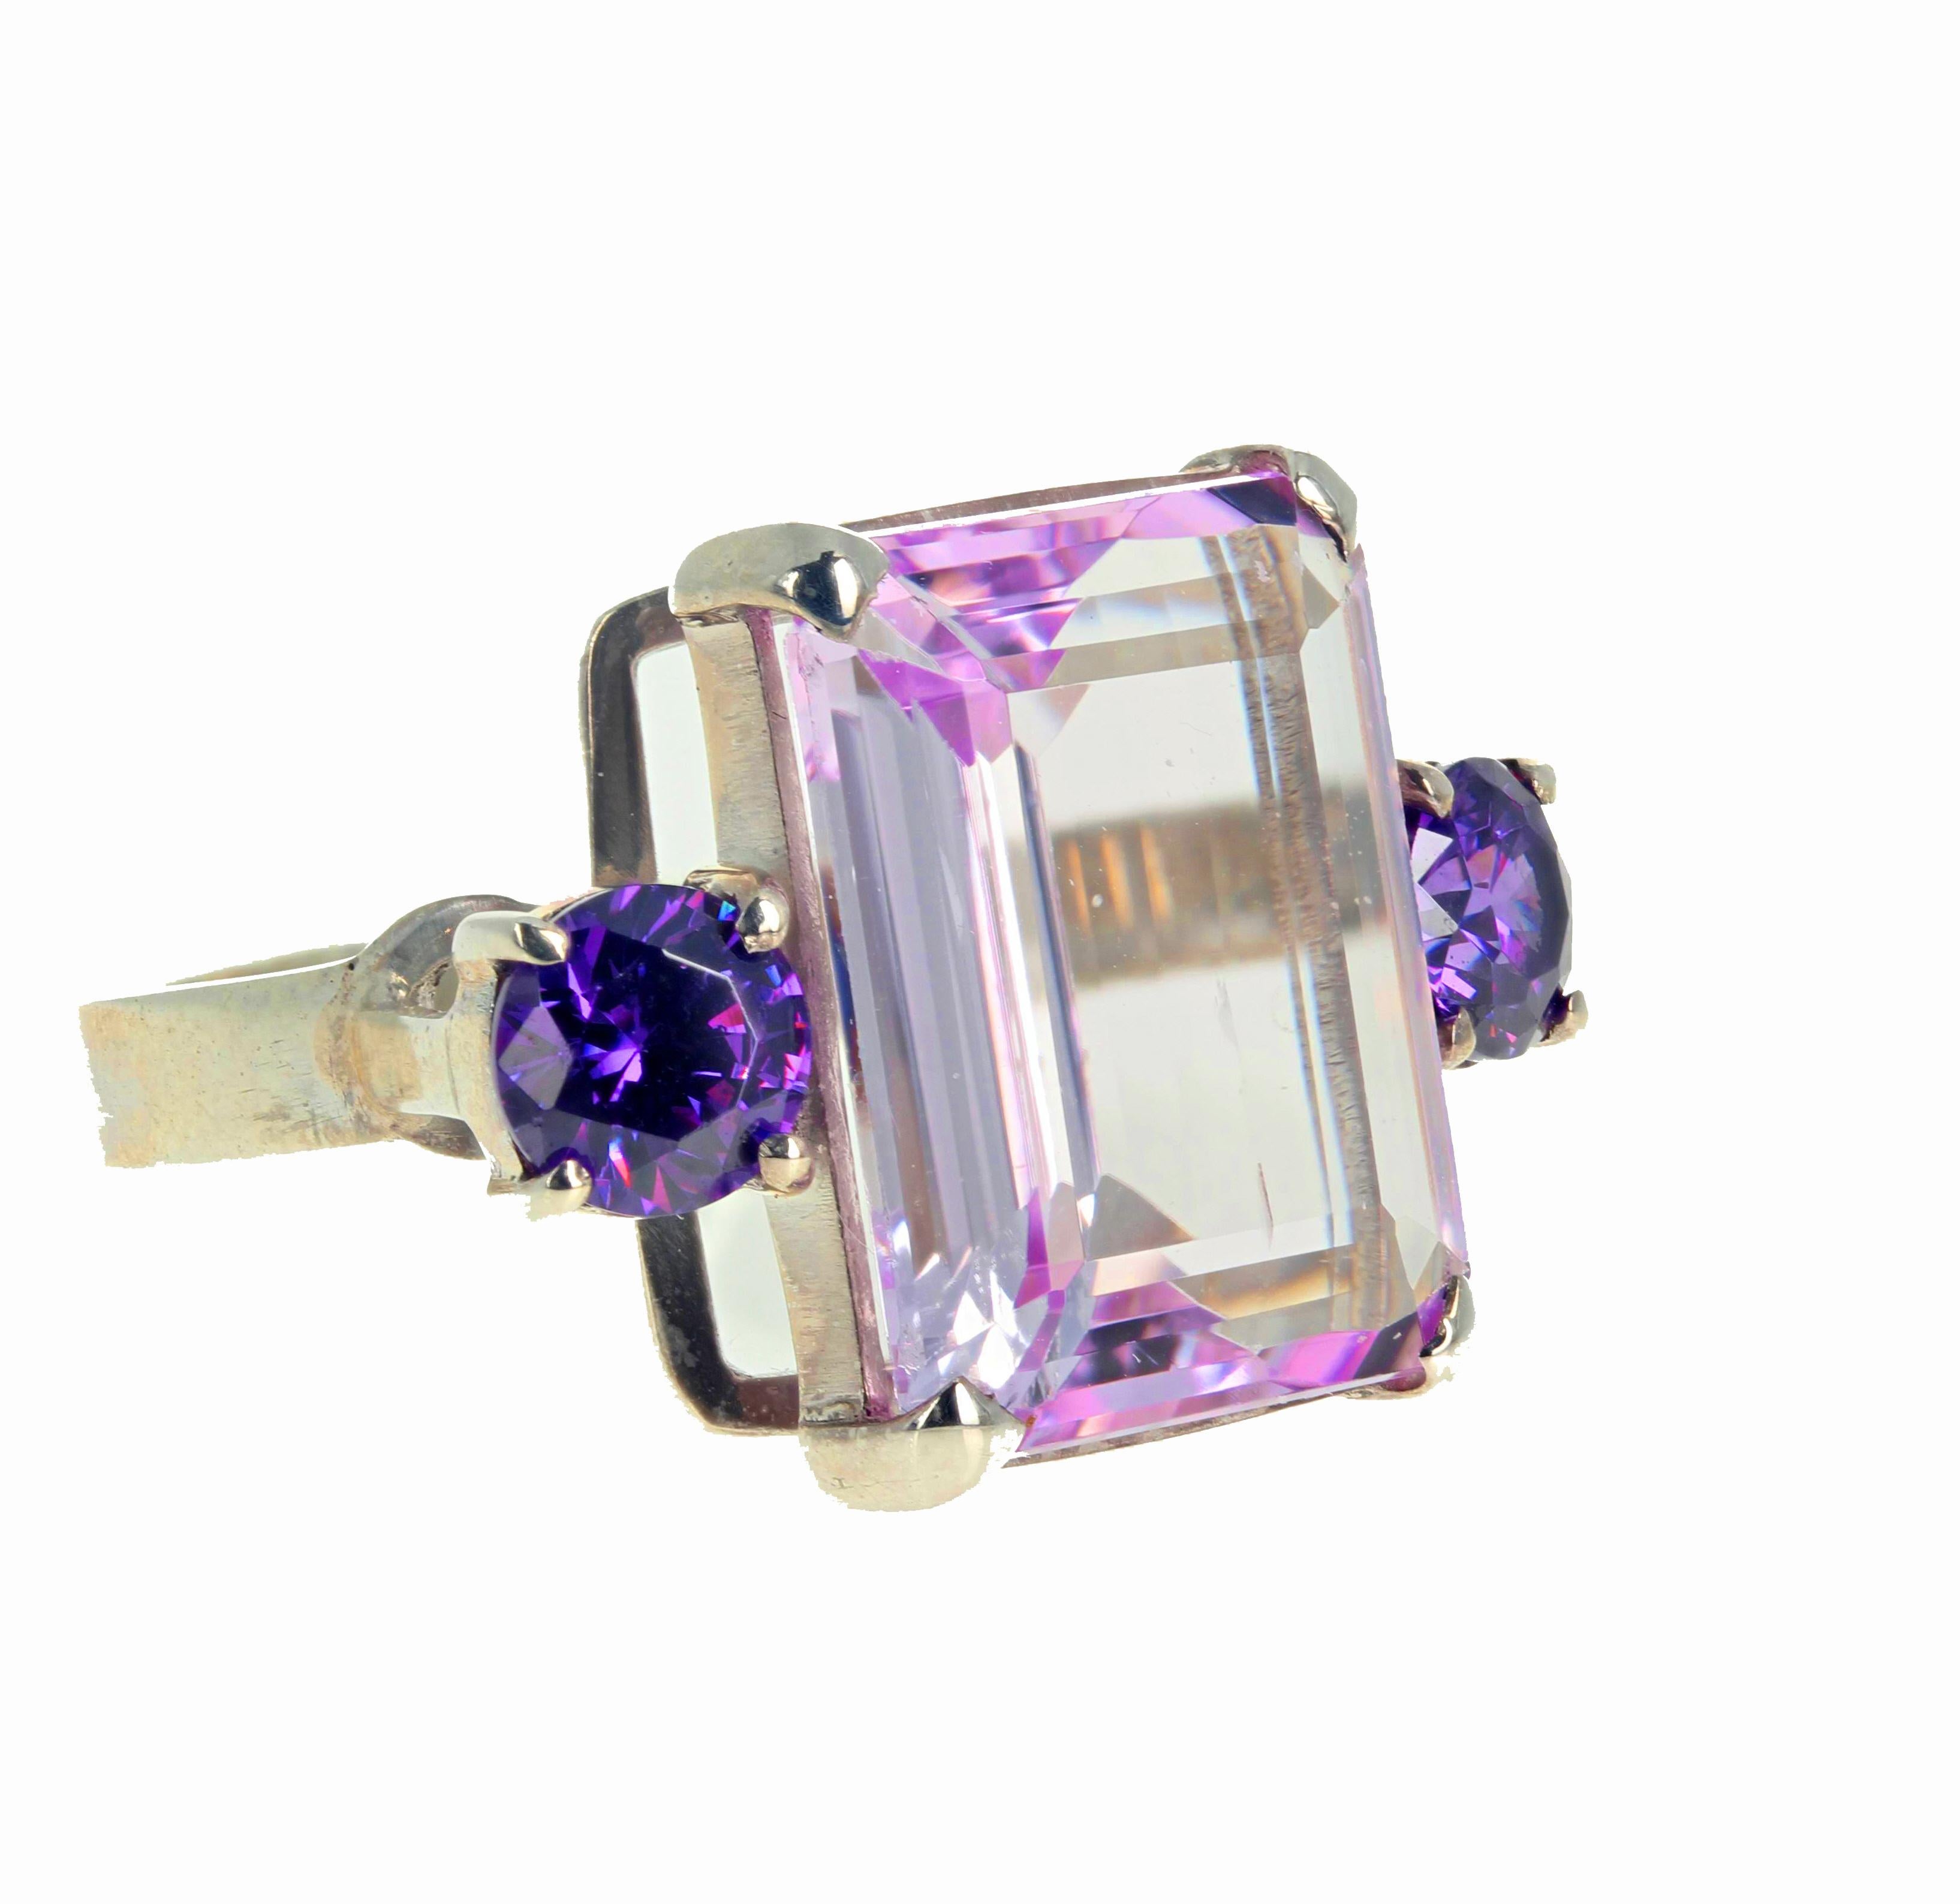 The clarity and beauty of this beautiful pinky translucent Kunzite (13.7 carats) is in its magnificent large size - 17.7 mm x 13.3mm - and in its enhancement by the glittering bright natural Amethysts (.70 carats each).  This ring is a size 8